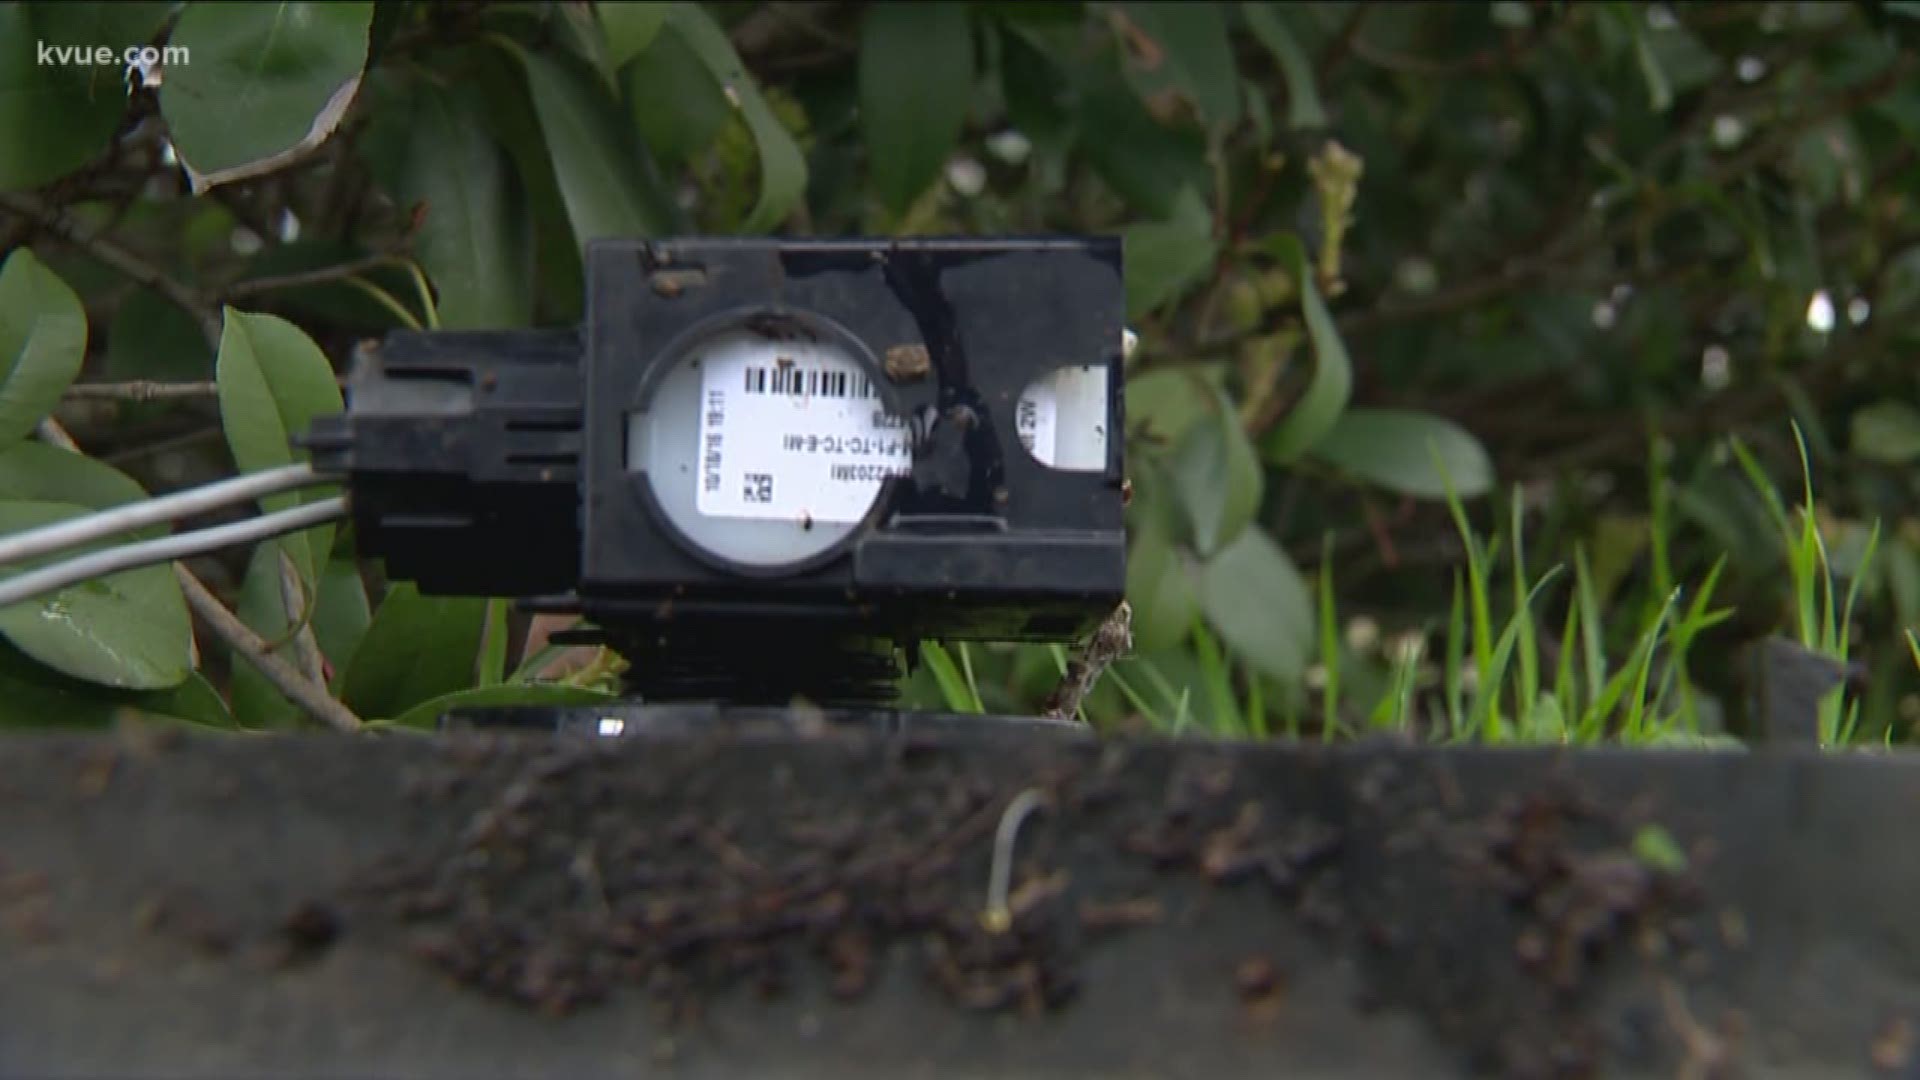 In the Spring -crews in Buda will start replacing water meters across the city.